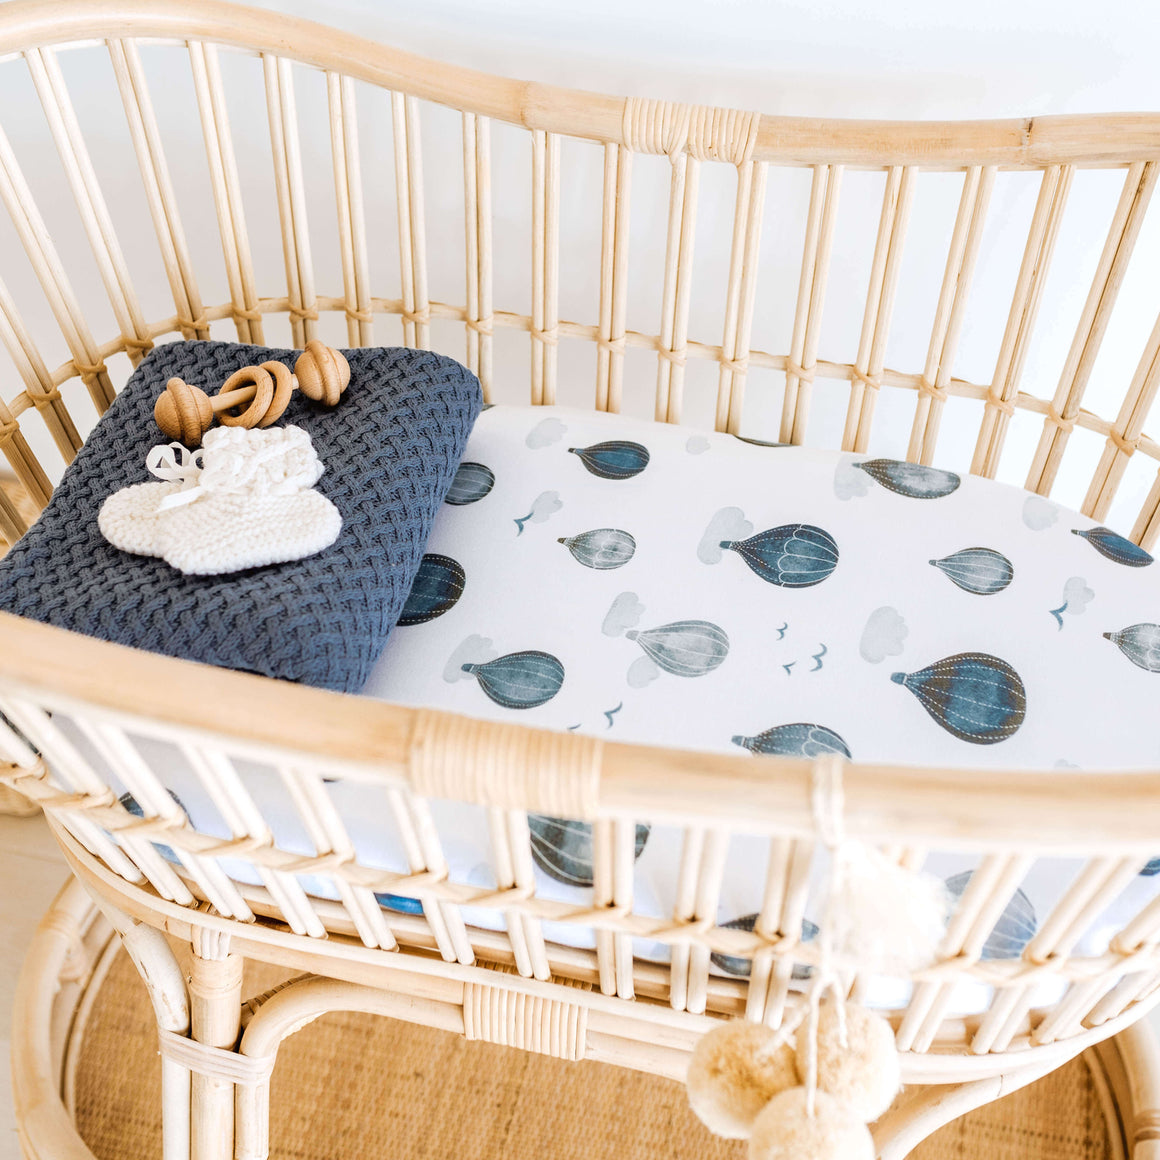 Rattan bassinet with cloud and hot air balloon sheet and folded blue blanket